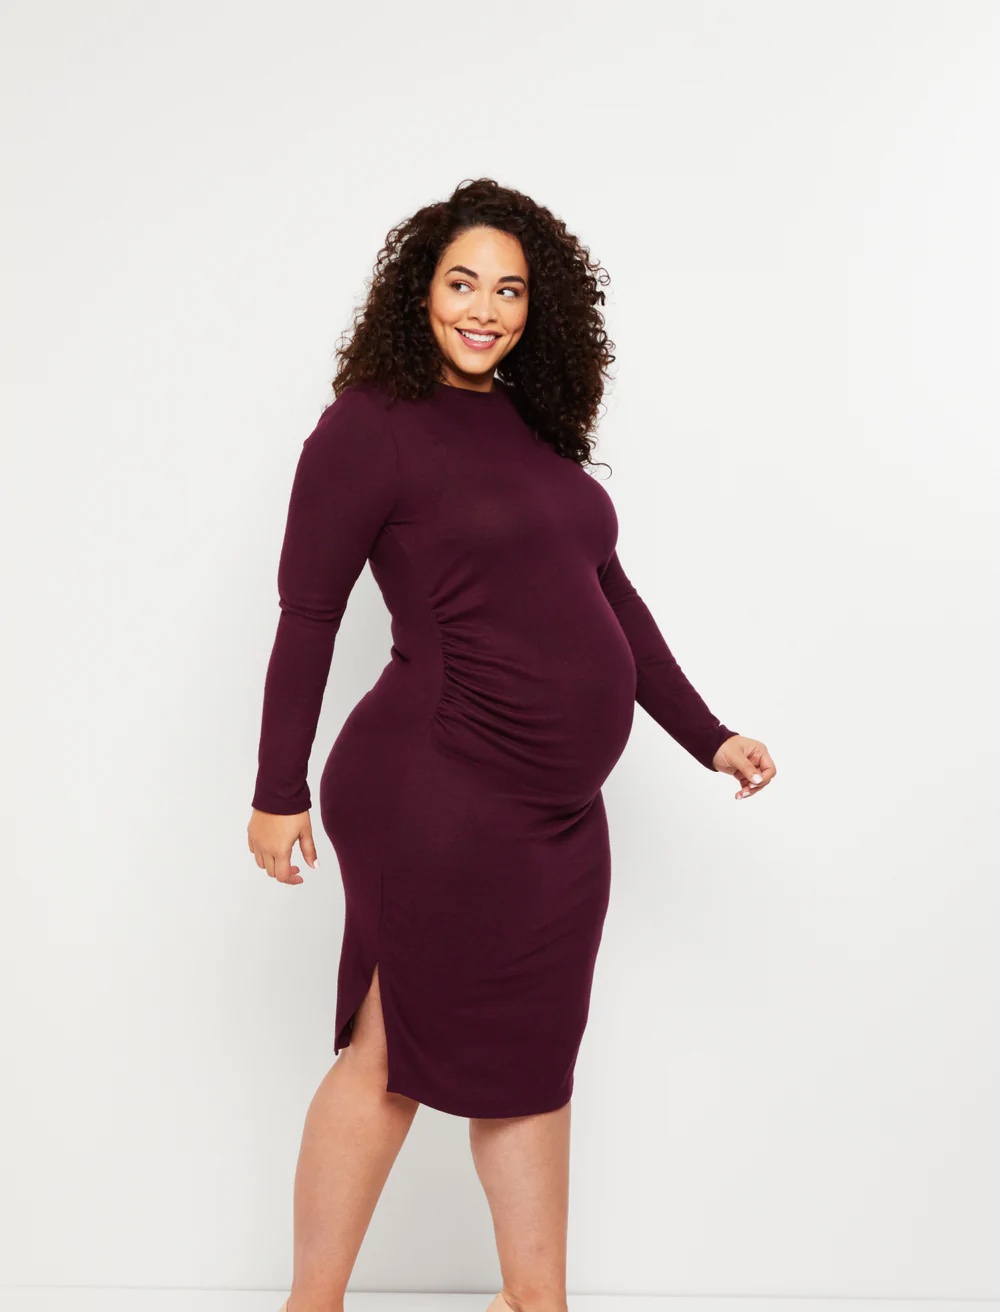 Made in USA HELLO MIZ Womens Midi Maternity Dress with Front Slit 